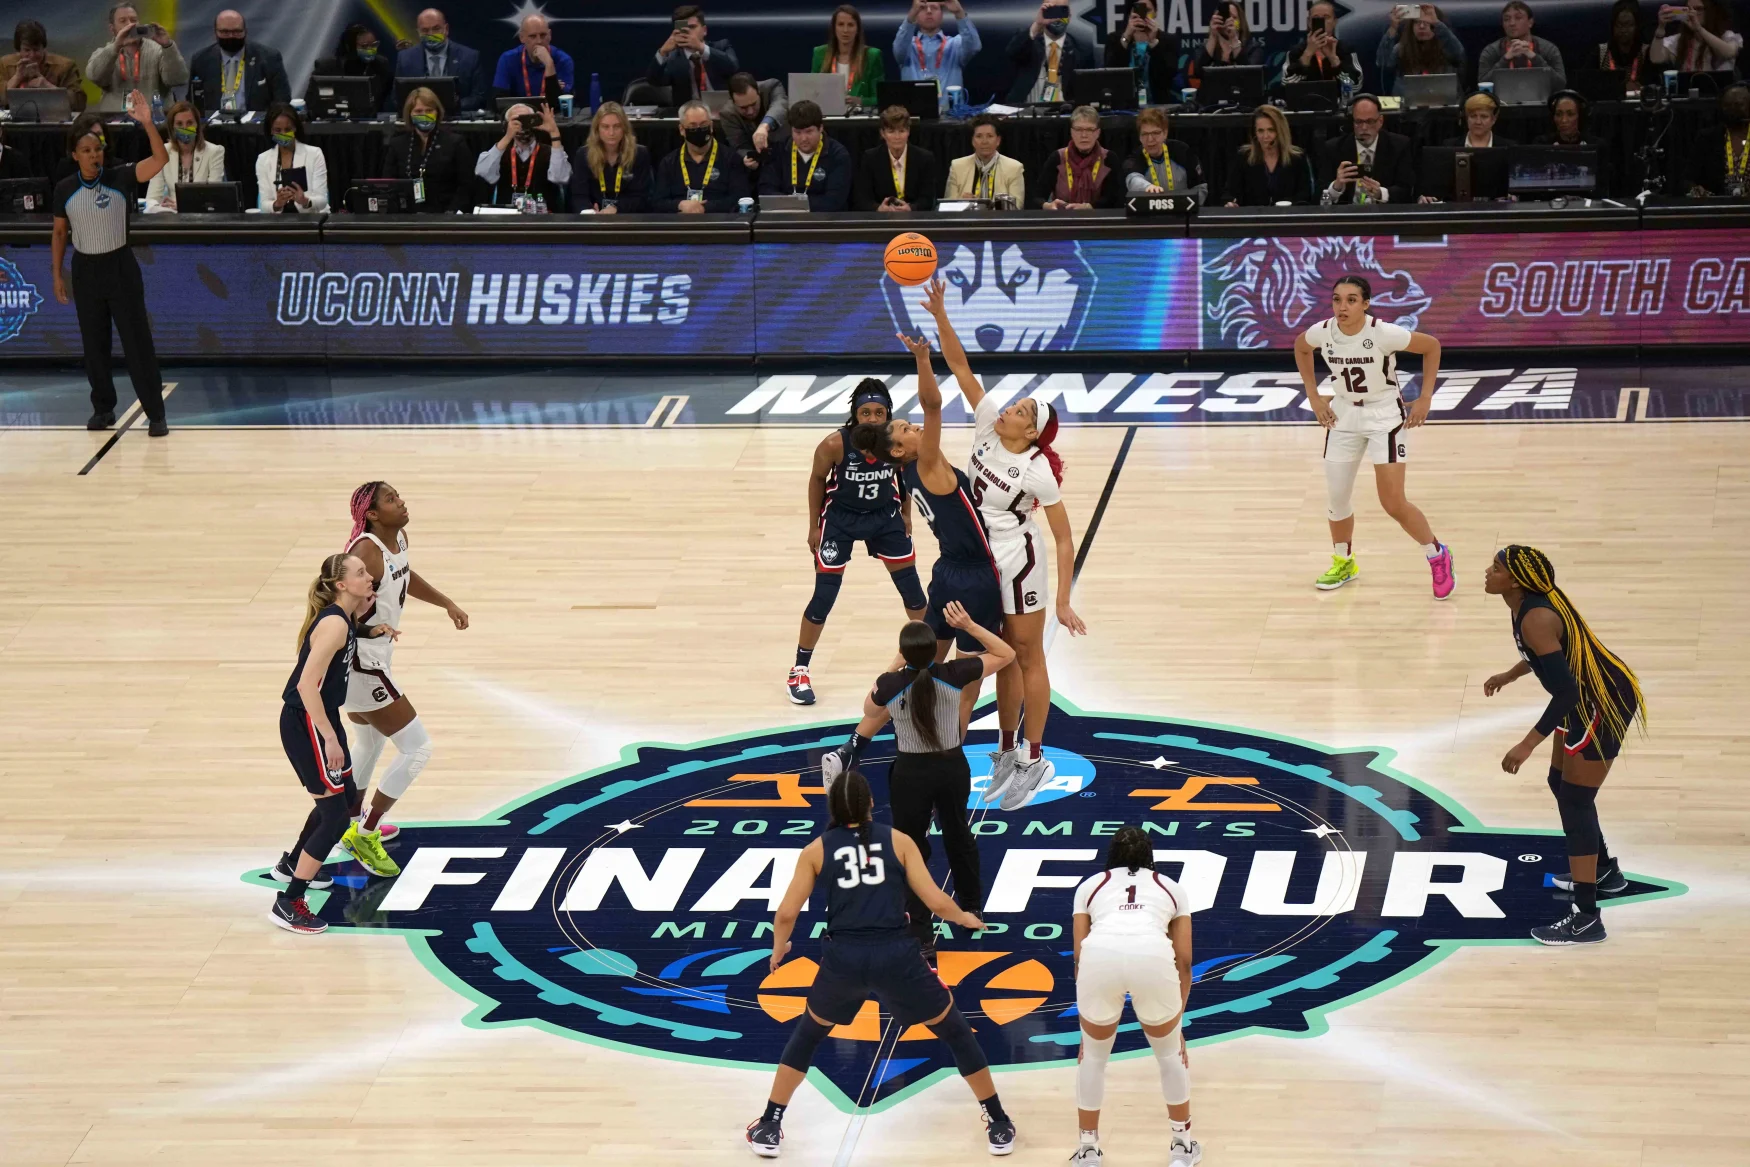 3 April 2022;  Minneapolis, MN, USA;  A general view of the opening tip between UConn Huskies forward Olivia Nelson-Ododa (20) and South Carolina Gamecocks forward Victaria Saxton (5) in the Final Four championship game of the women's college basketball NCAA Tournament at Target Center.  South Carolina defeated UConn 64-49.  Mandatory Credit: Kirby Lee-USA TODAY Sports